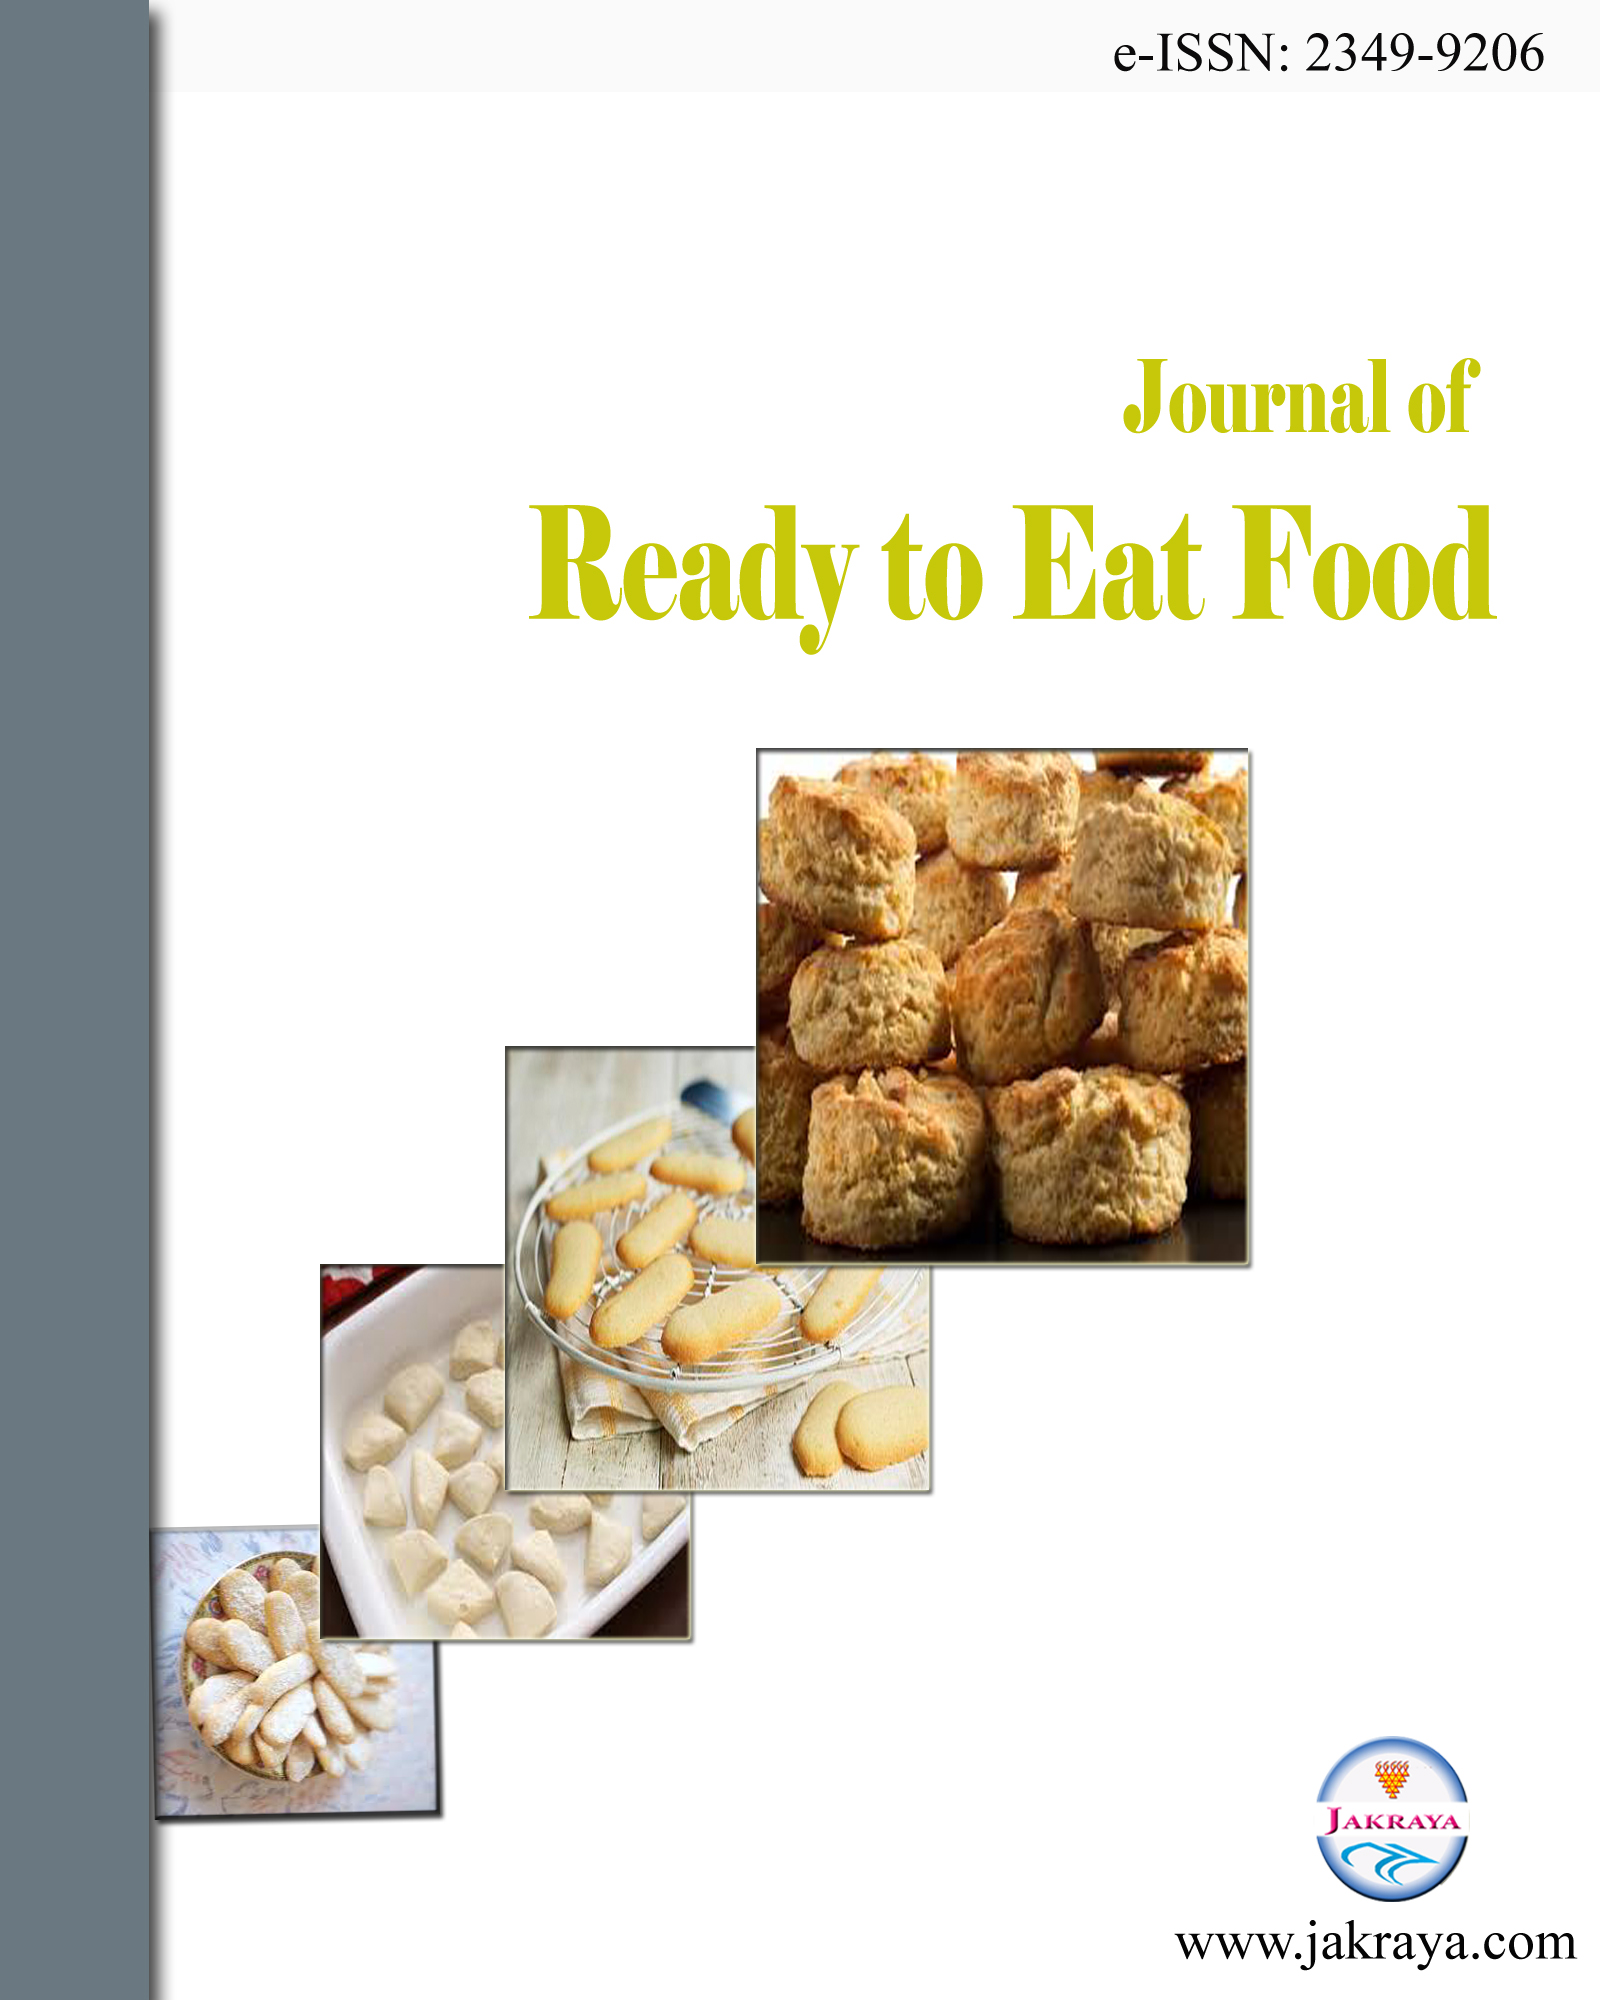 Journal of Ready to Eat Food